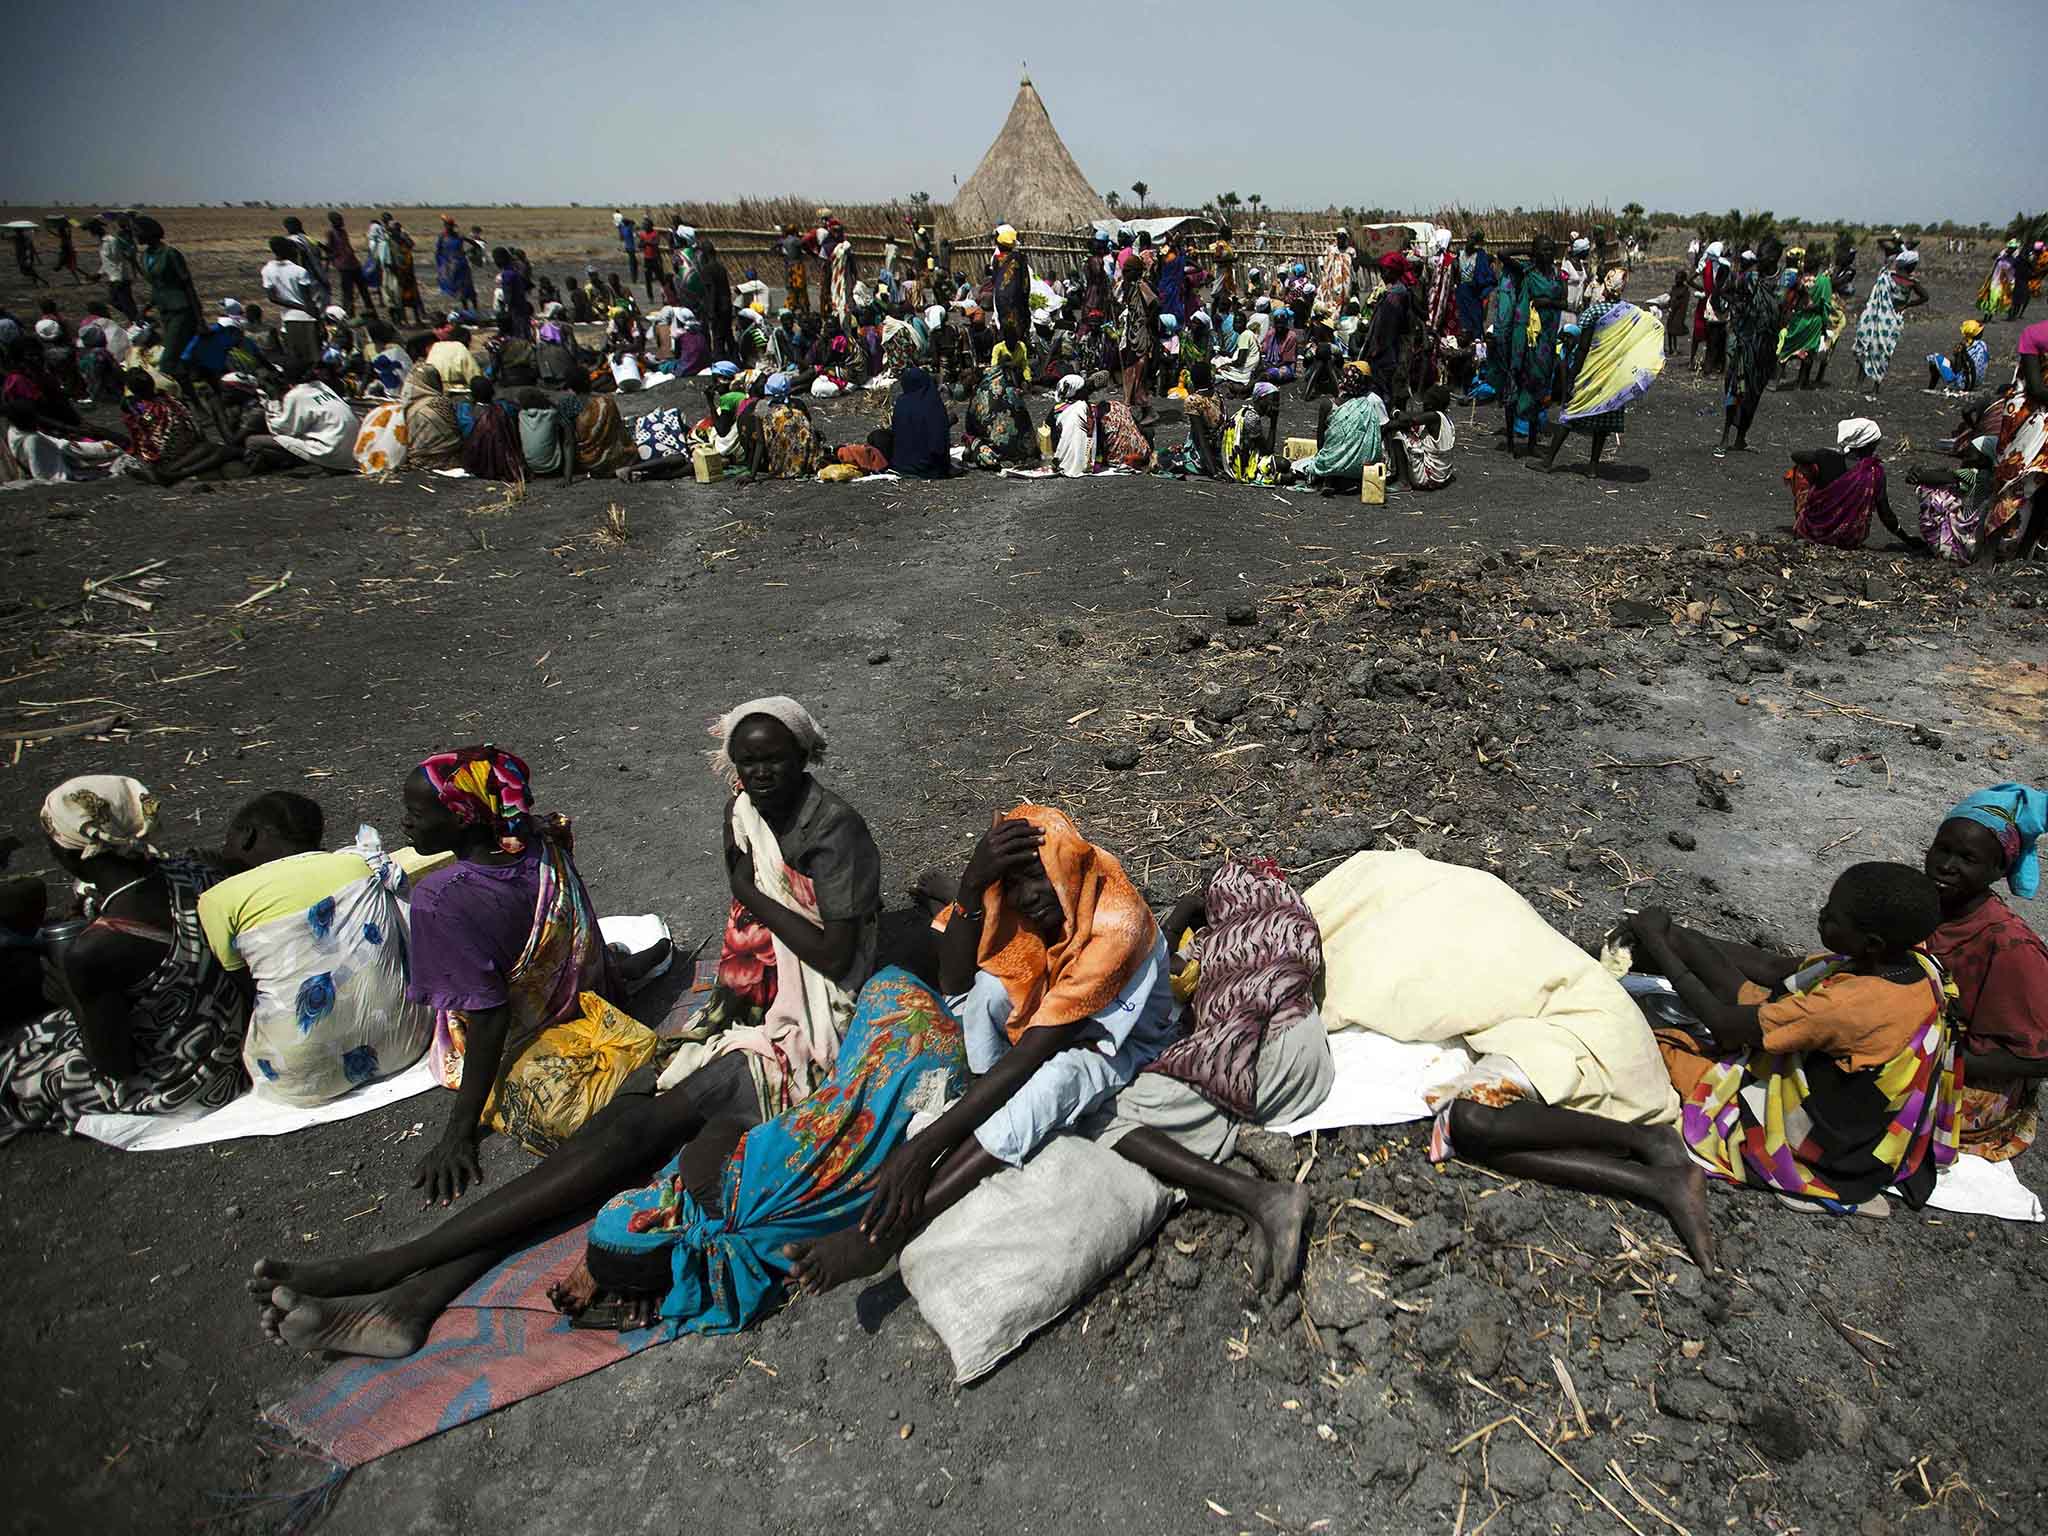 A large number of people wait for food air-drops by ICRC (International Committee of the Red Cross), outside Thonyor, in South Sudan, on February 3, 2016.